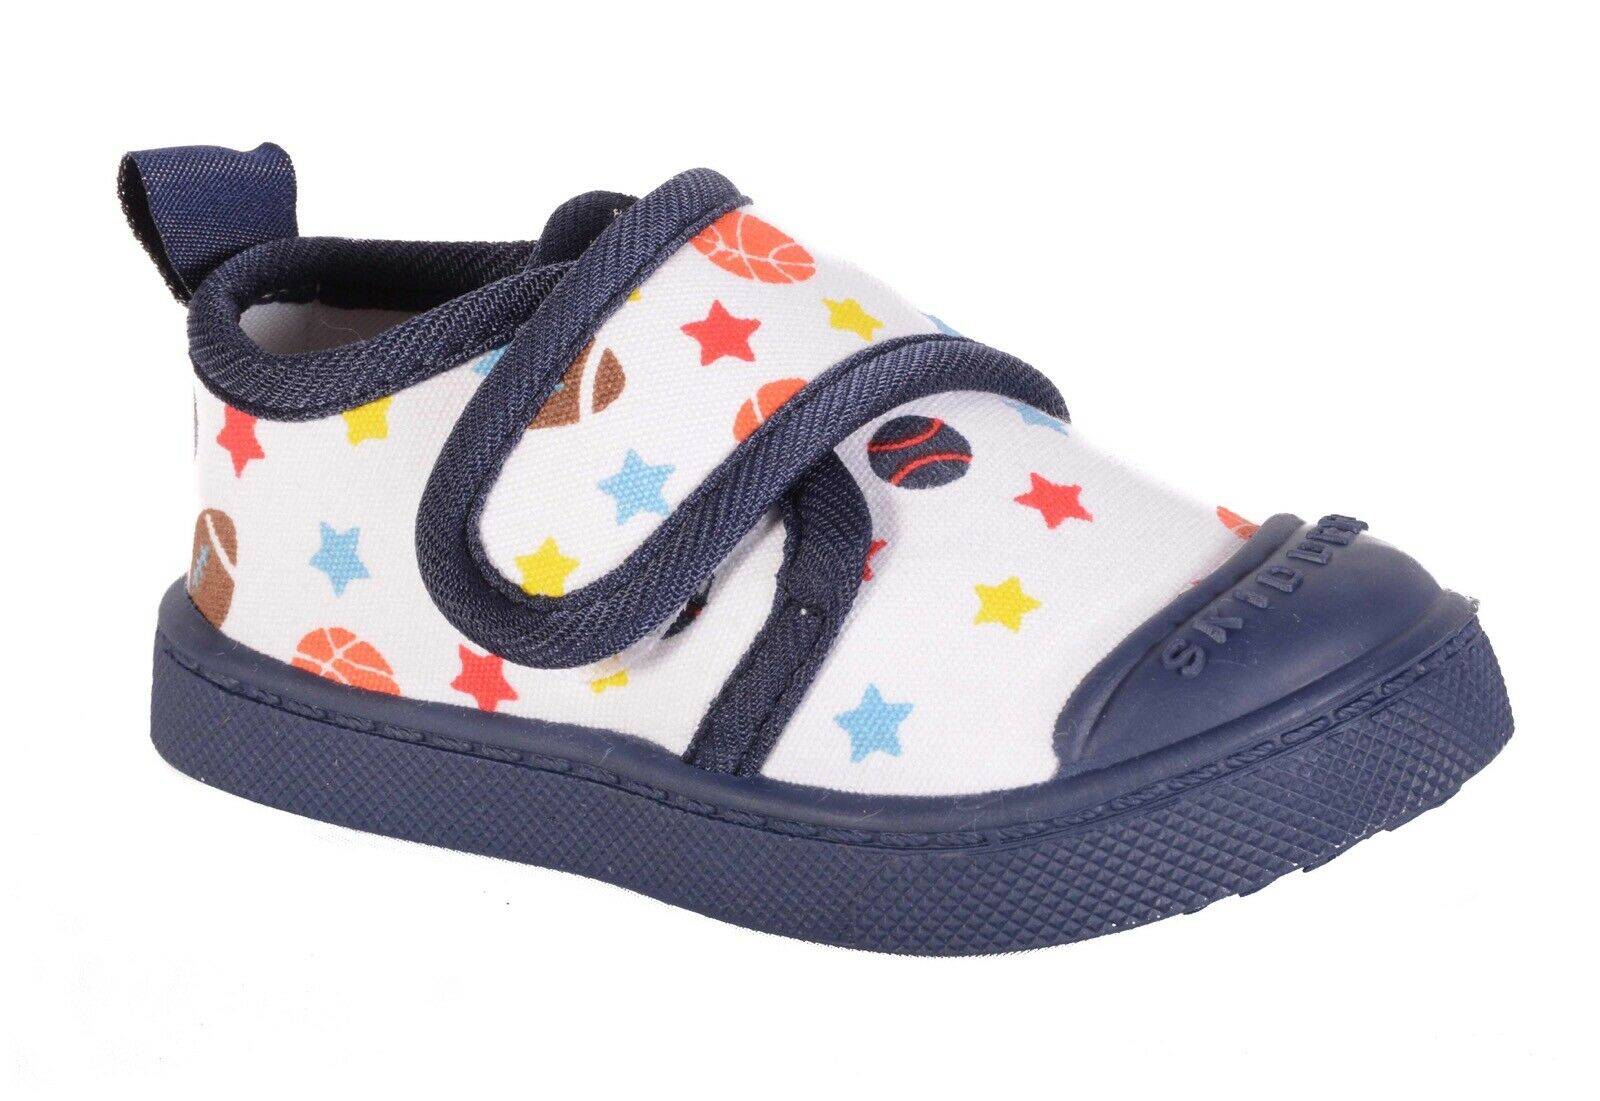 Skidders Baby Toddler Boys Canvas Walking Shoes Style SK1007 Size 2 NWT